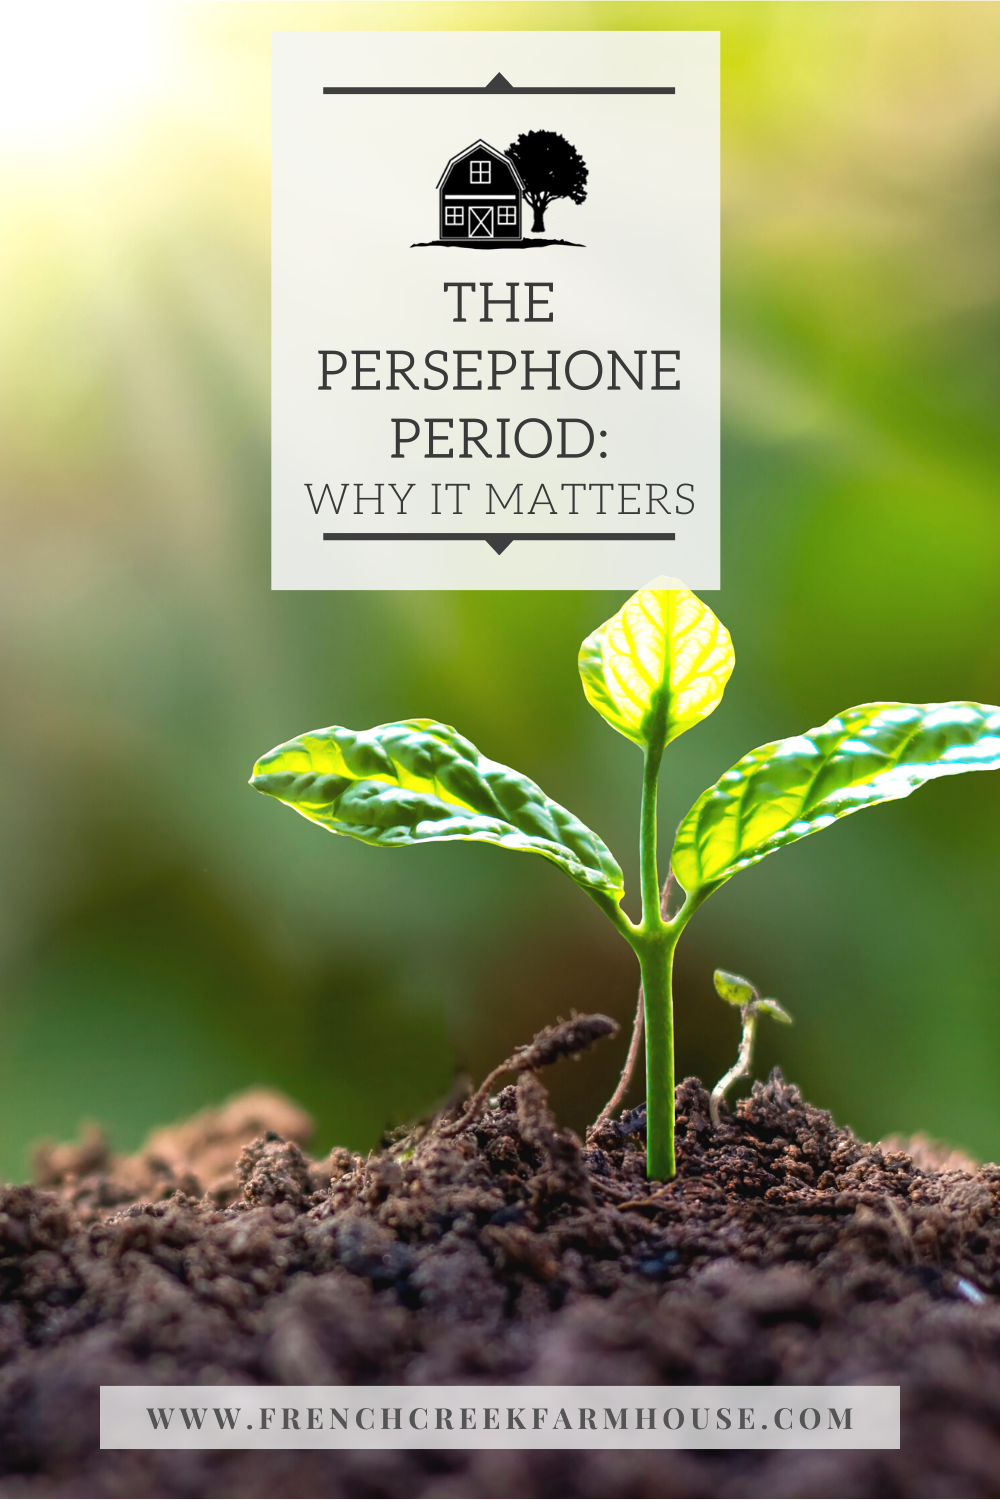 The Persephone Period and Why It Matters